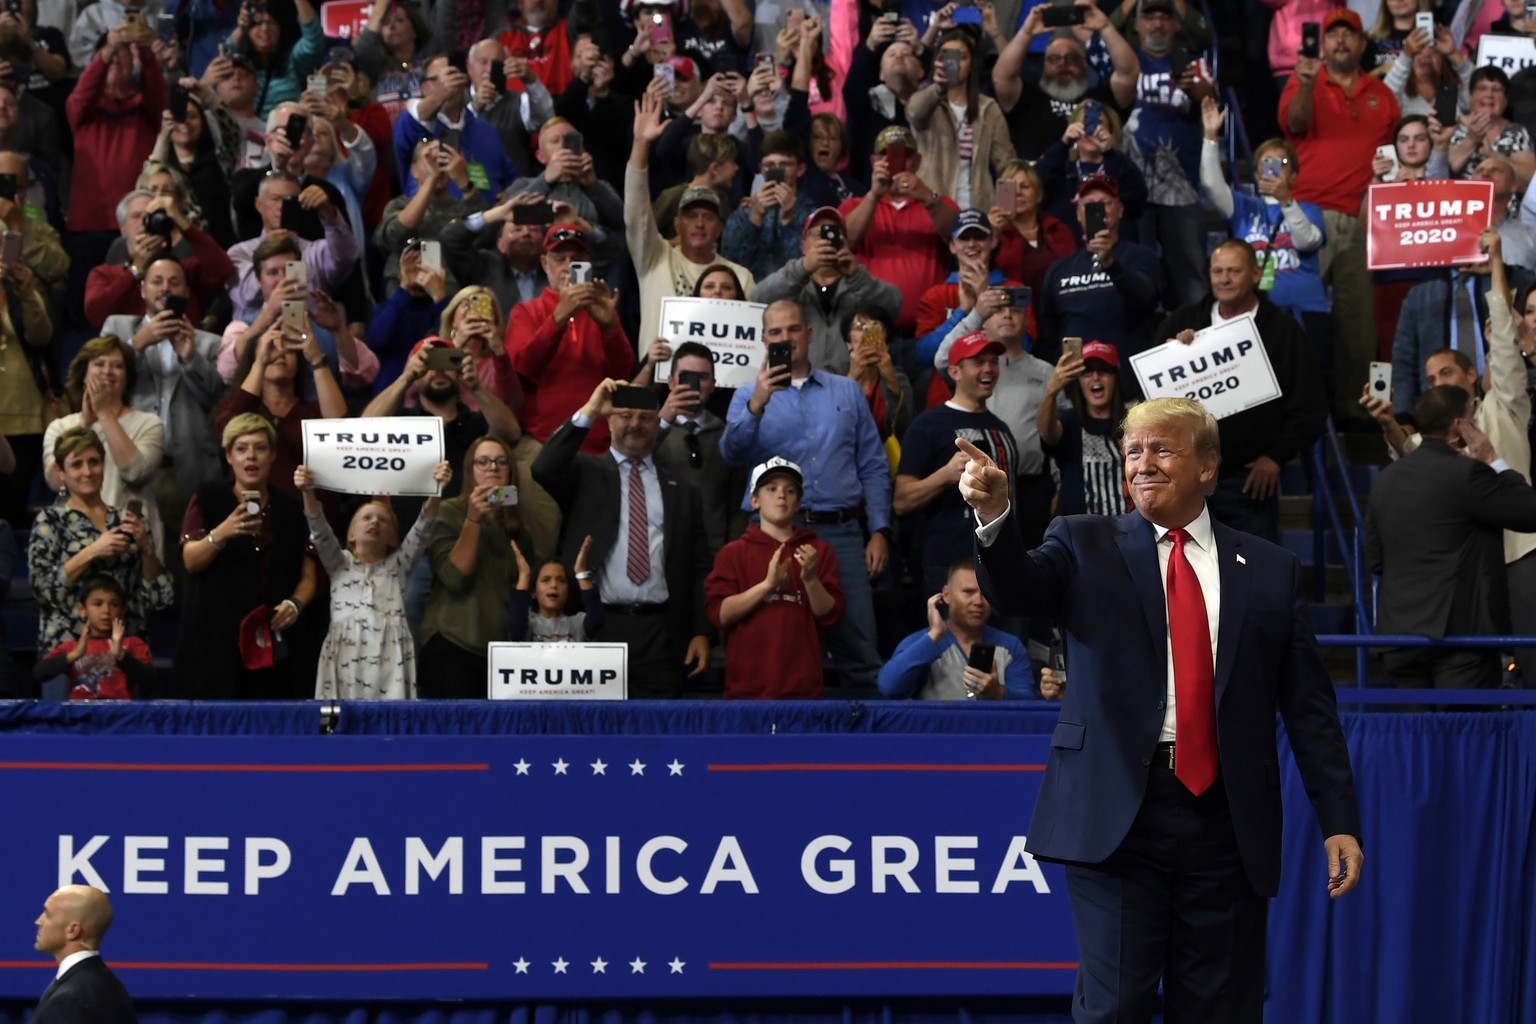 President Donald Trump arrives to speak at a campaign rally in, Lexington, Ky., Monday, Nov. 4, 2019. (AP Photo/Susan Walsh)
Donald Trump